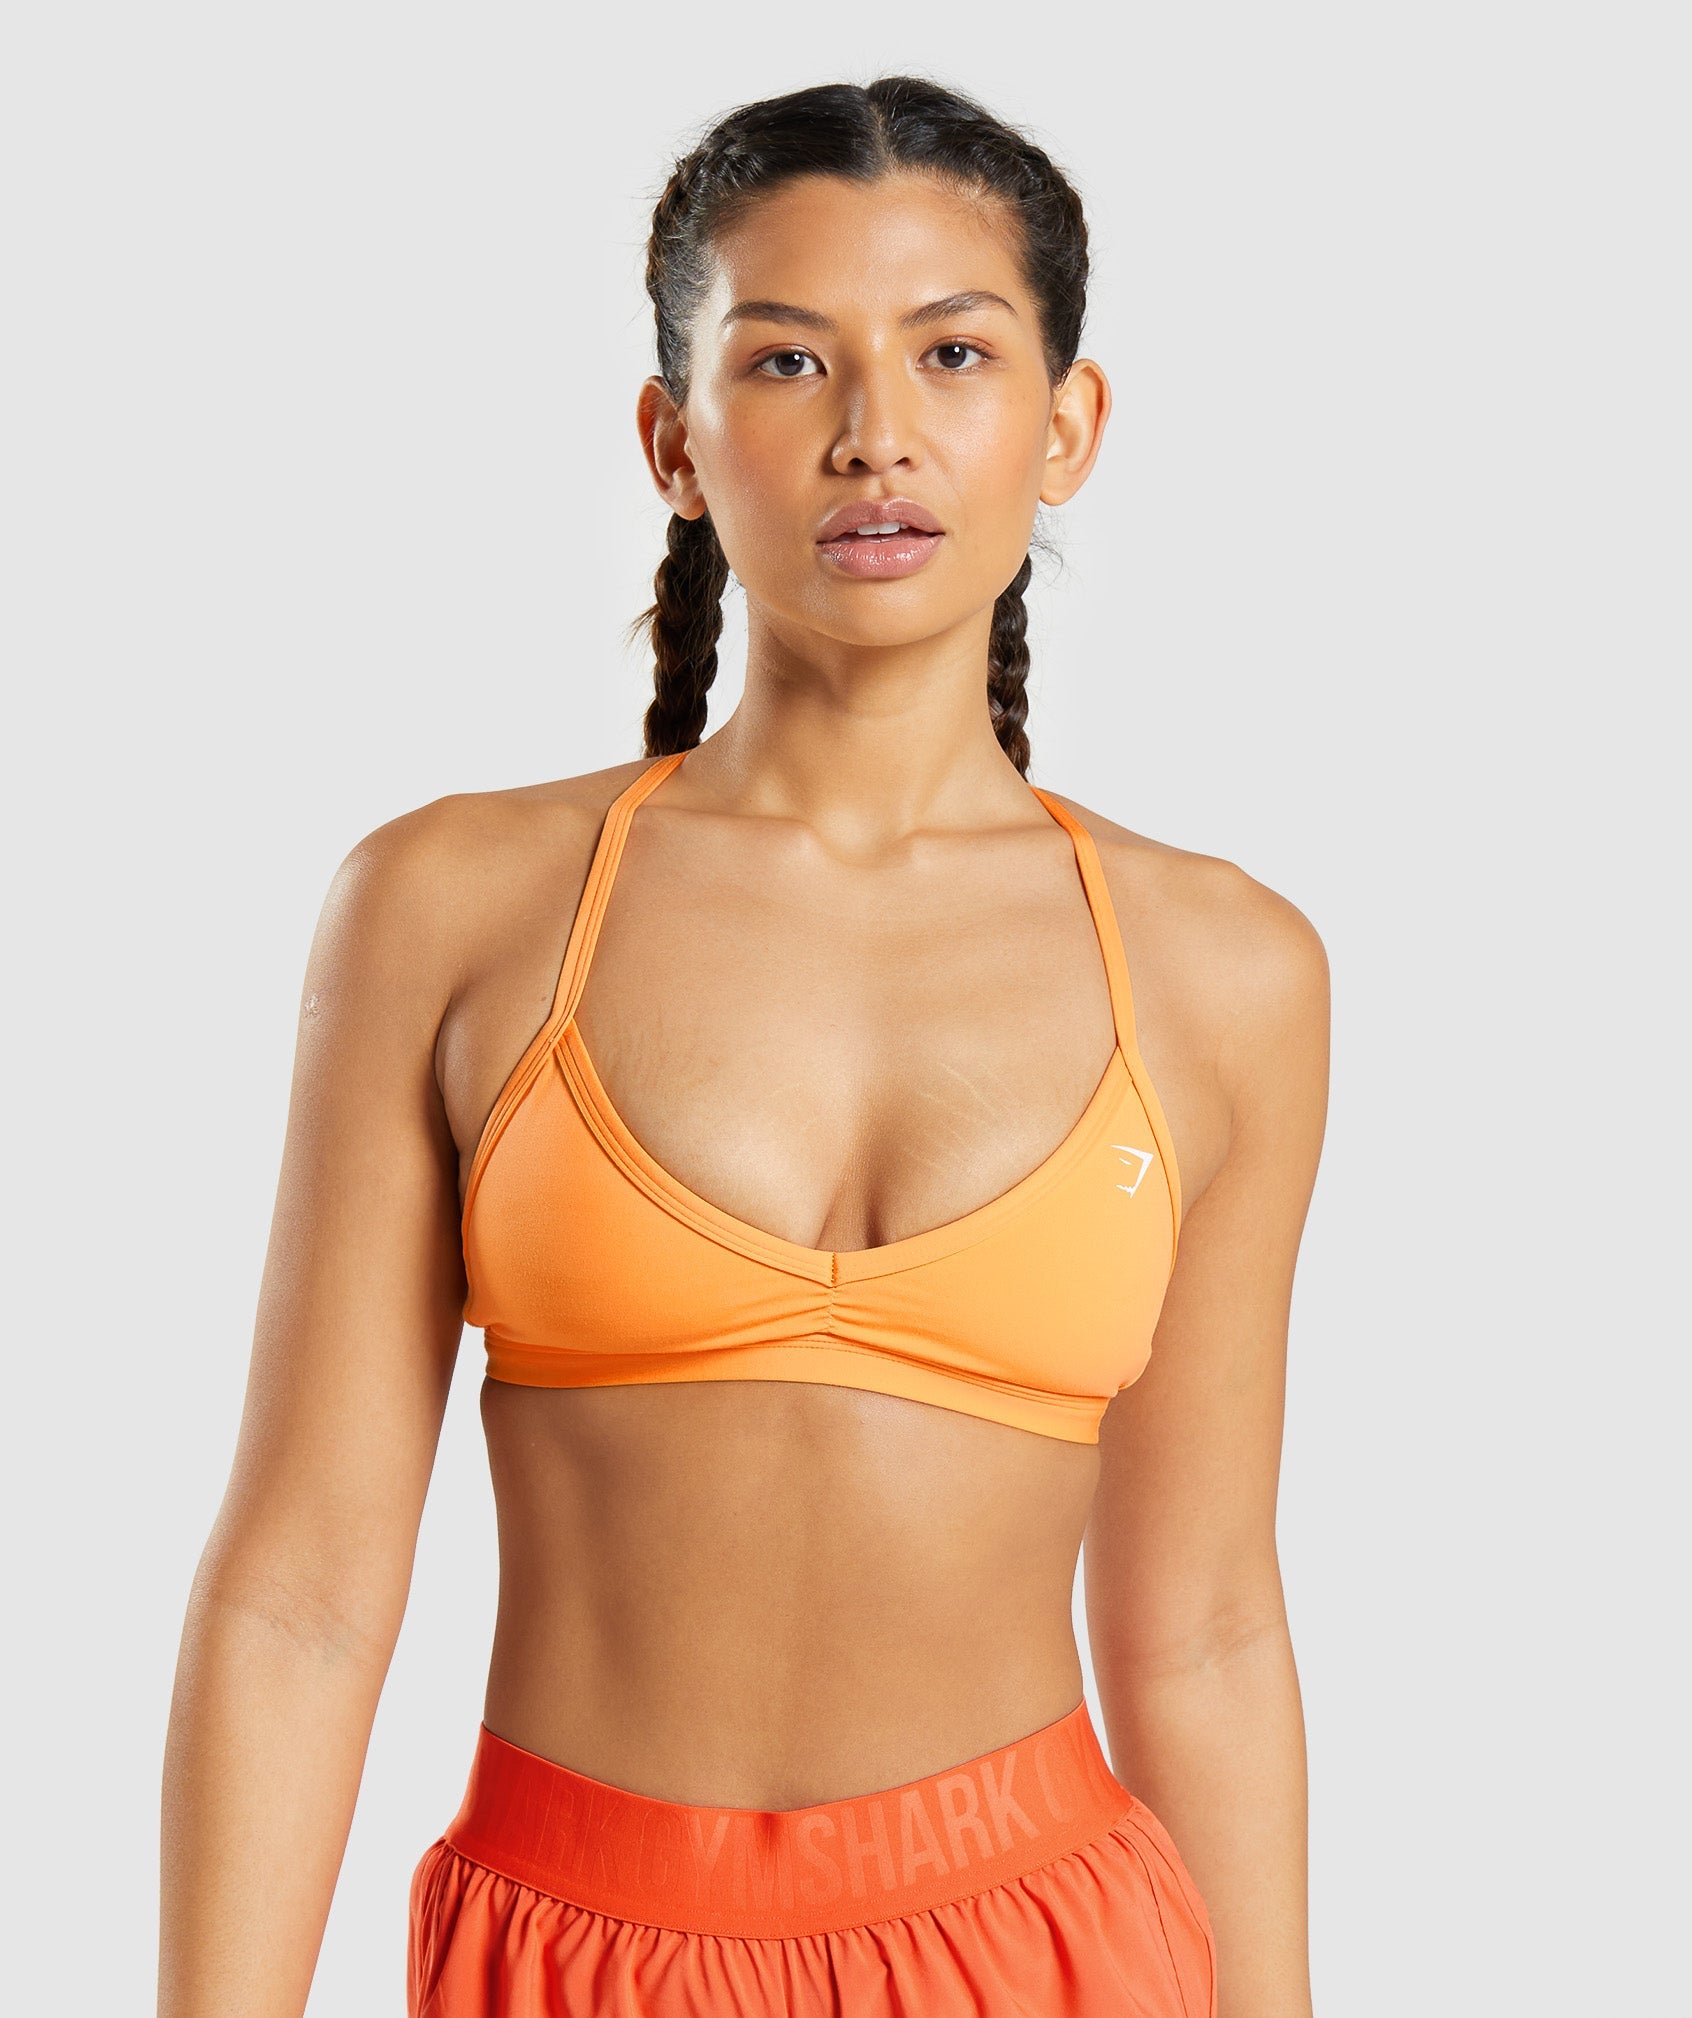 Minimal Sports Bra in Apricot Orange is out of stock